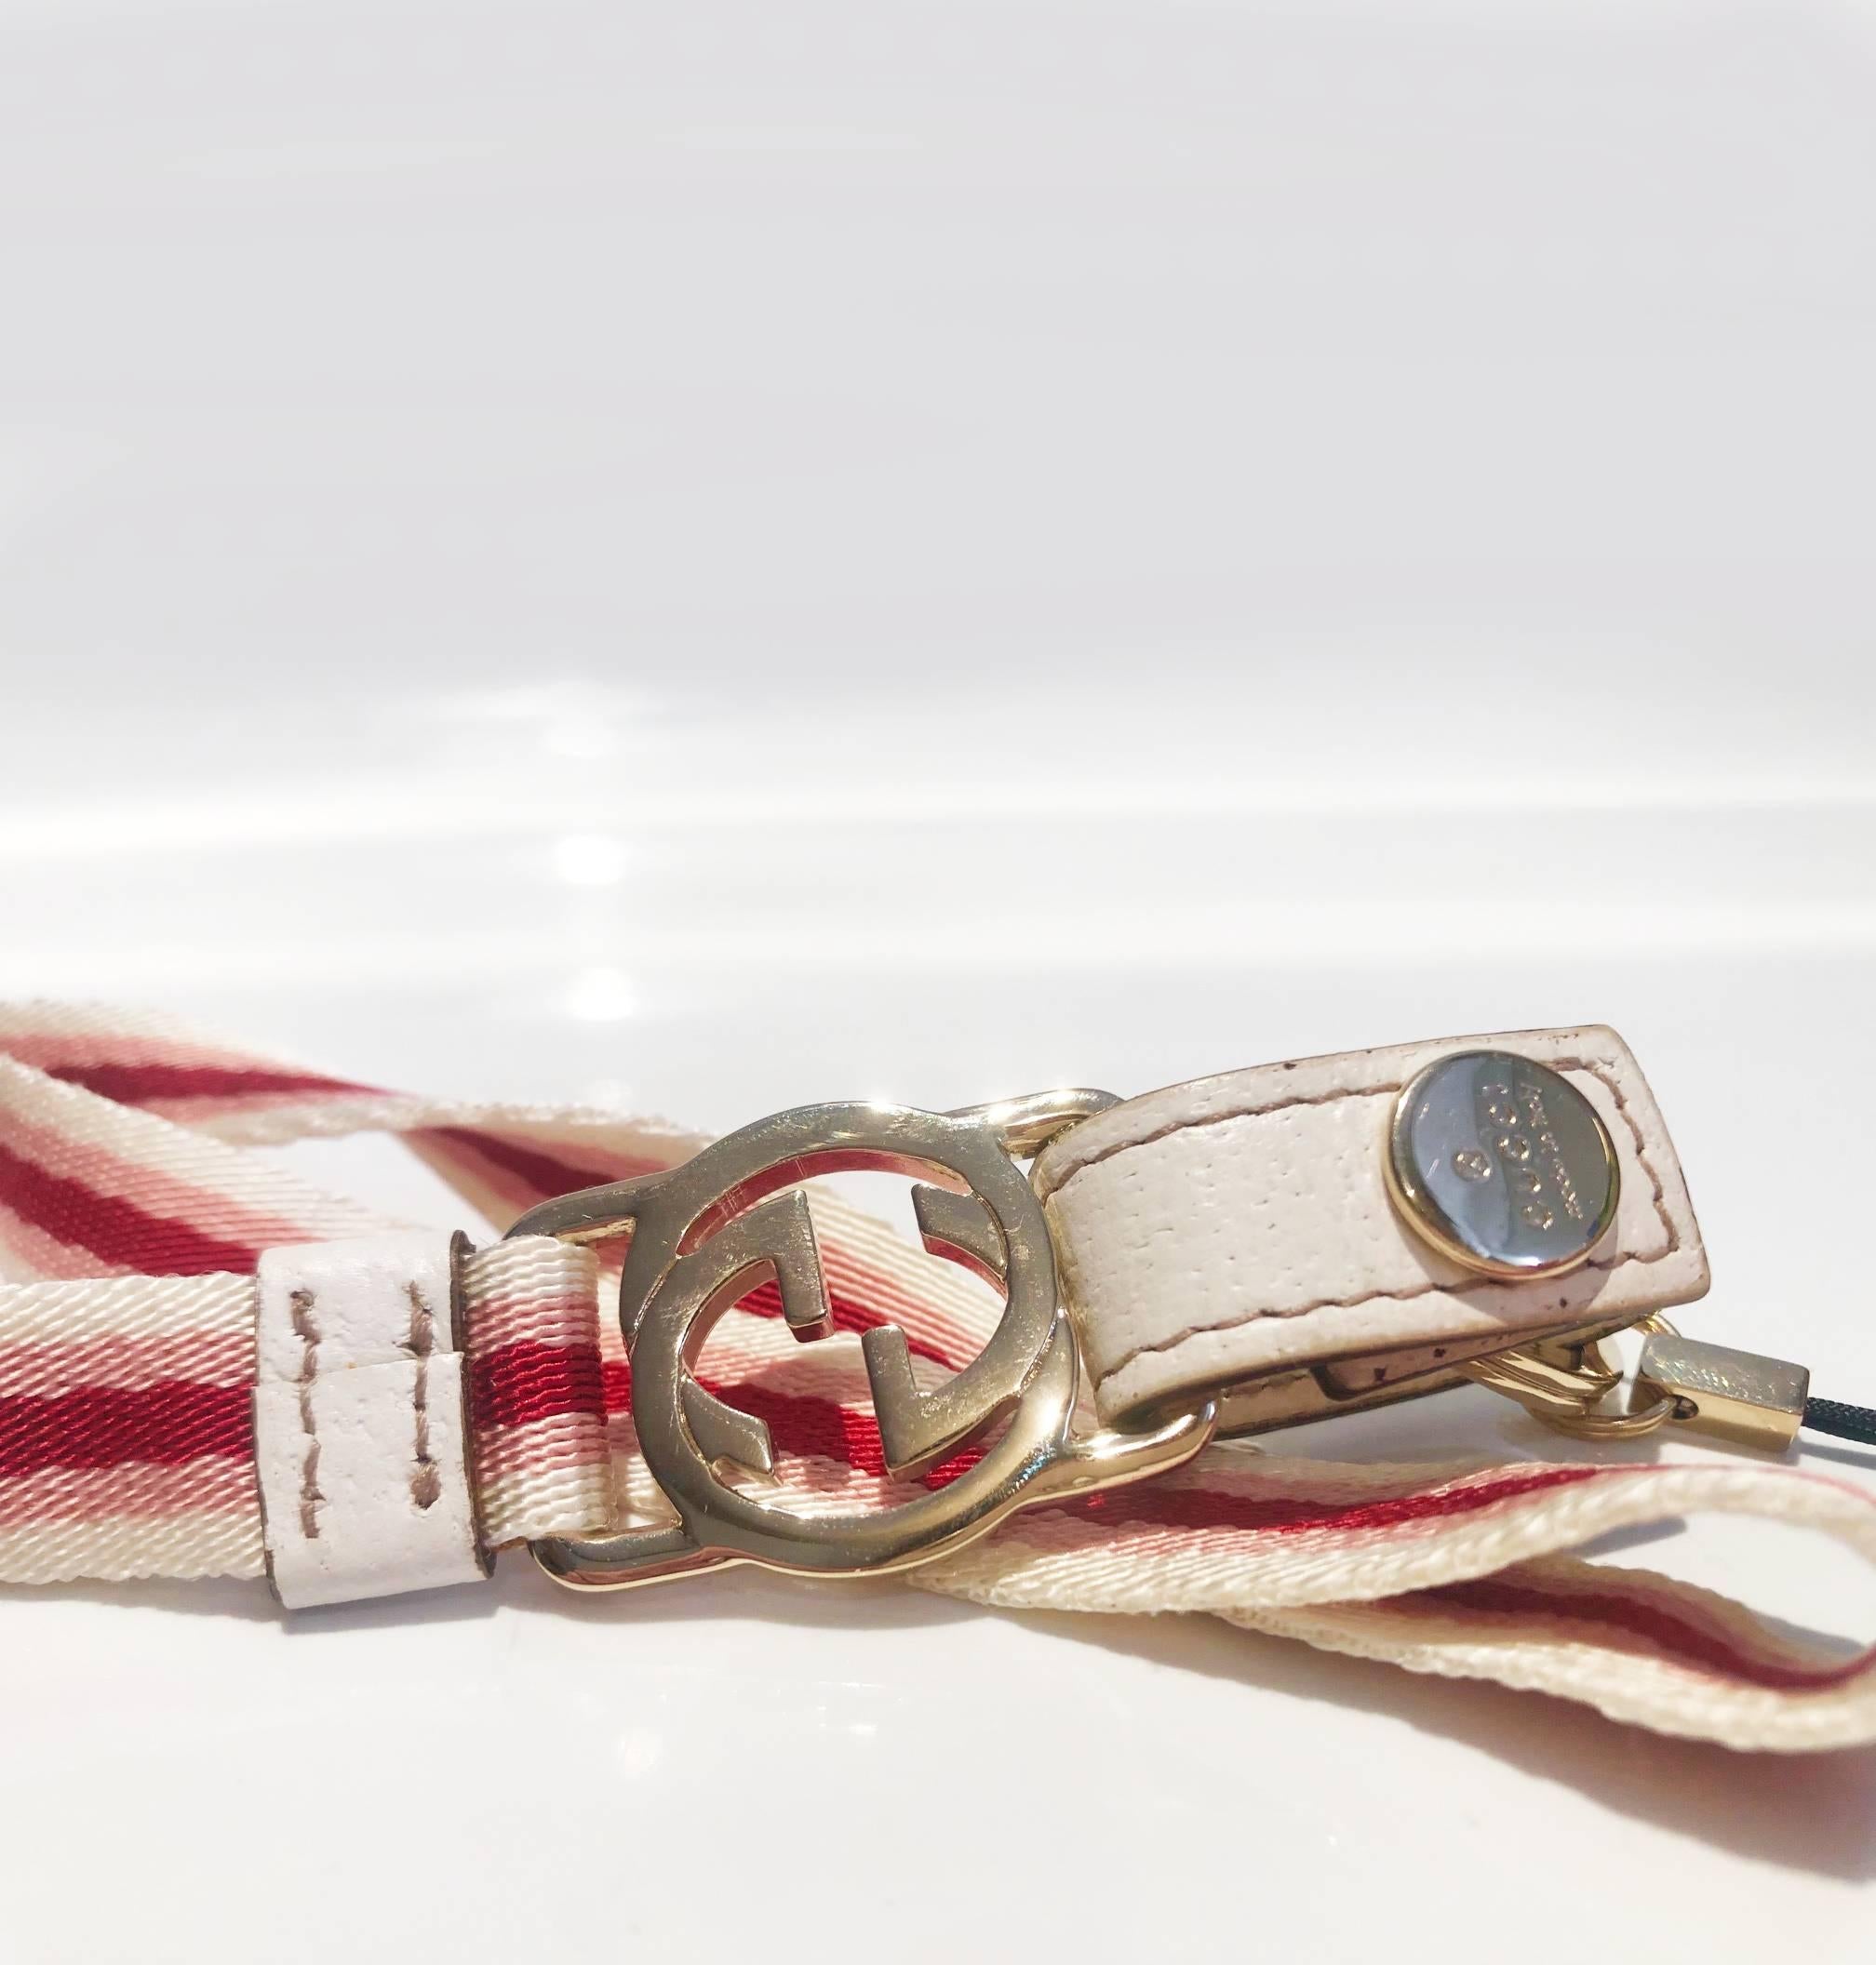 Gucci interlocking metal logo key and phone lanyard, red, white and pink cord strap, metal ring, Made in Italy

Condition: vintage, Tom Ford's era 2000s, like new

Measurements:
- overall length: 53cm 
- metal logo: 3cm